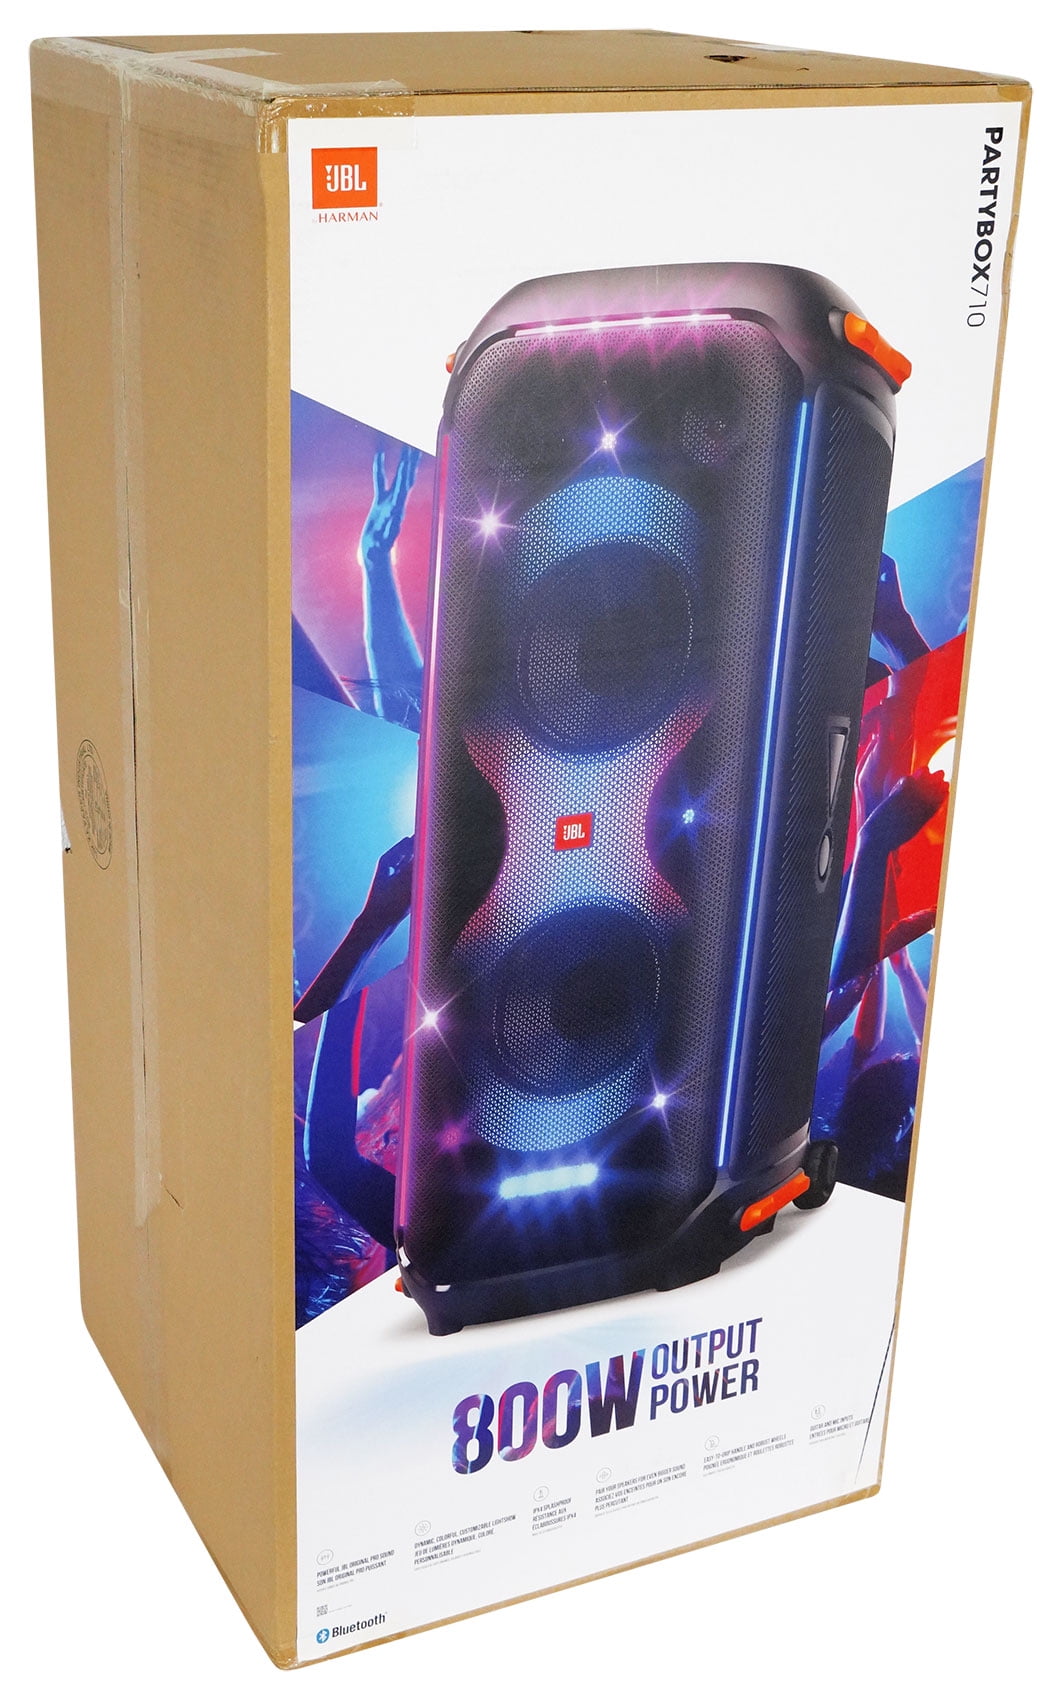 Buy JBL Partybox 710 Portable Bluetooth Party Speaker Online in India at  Lowest Price